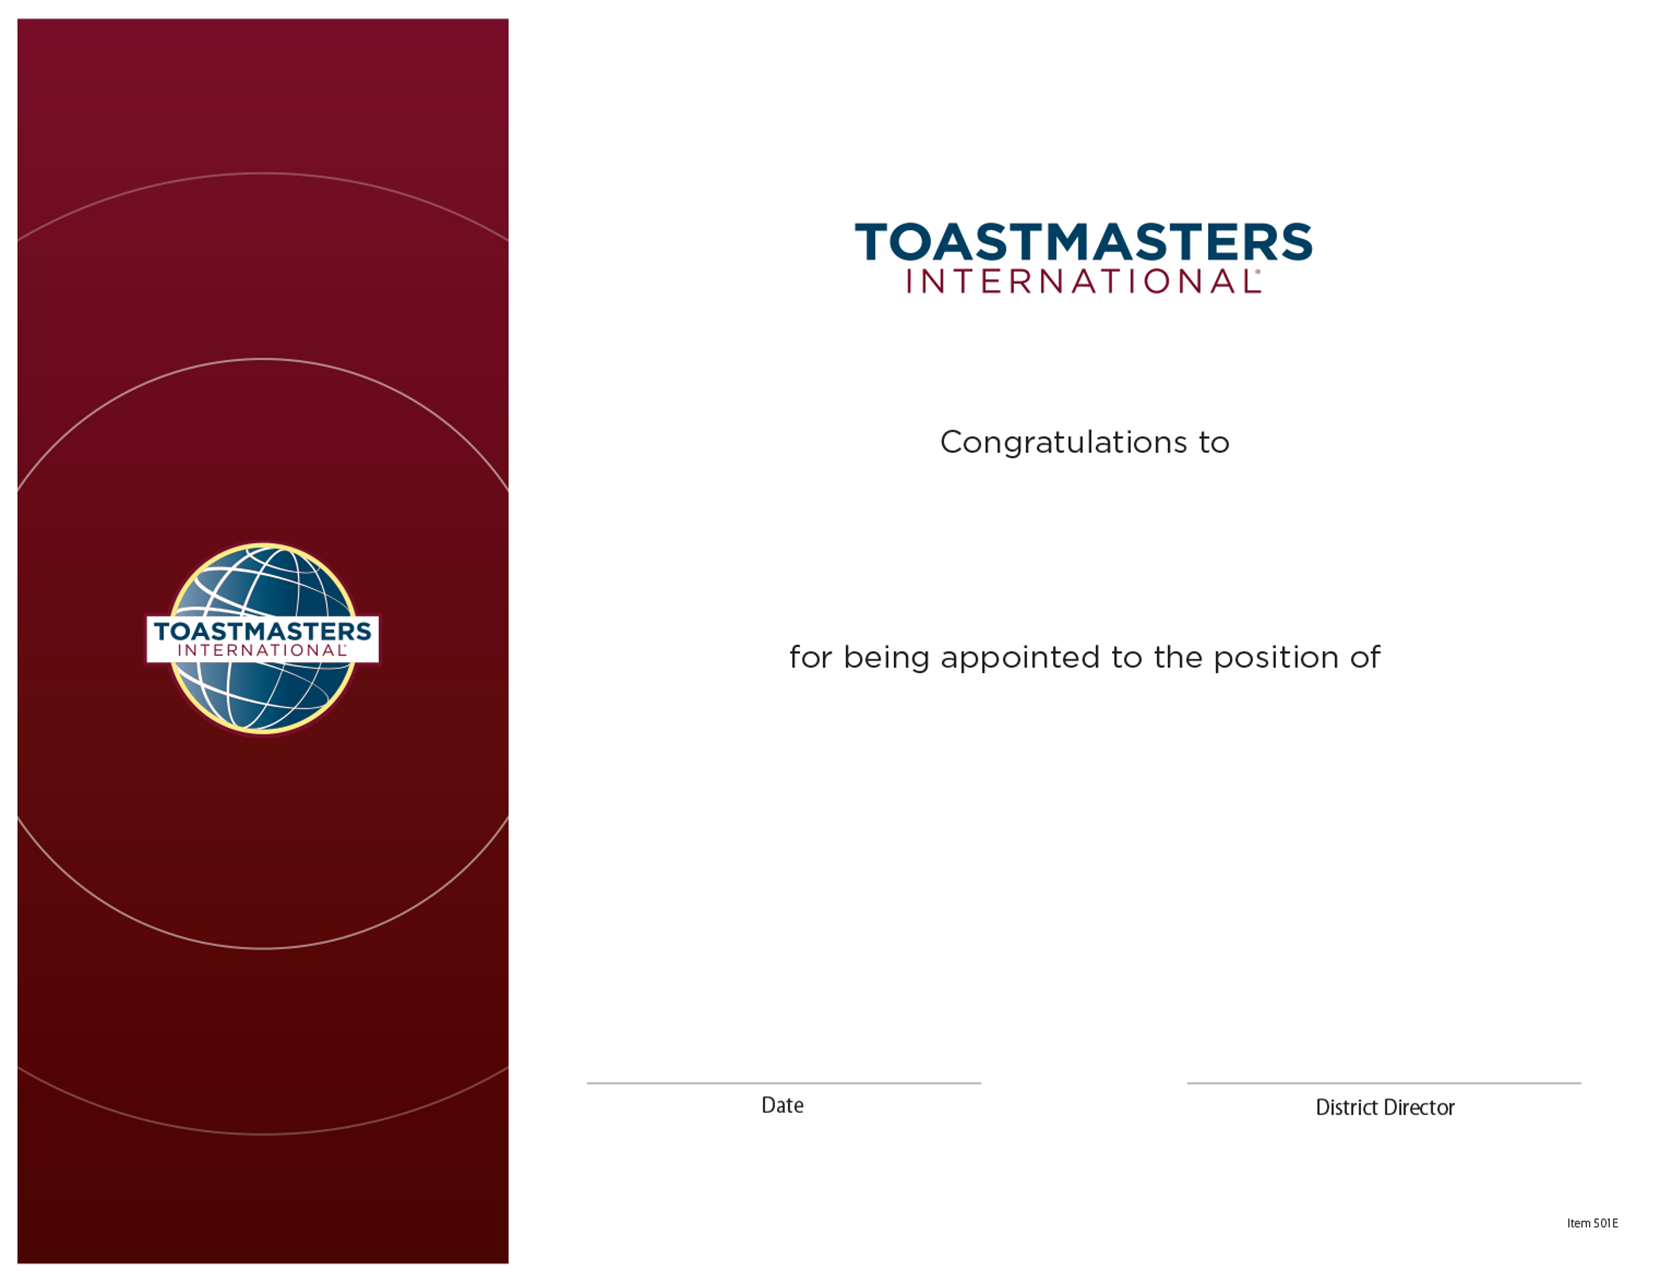 District-Appointment-Certificate-Toastmasters-International